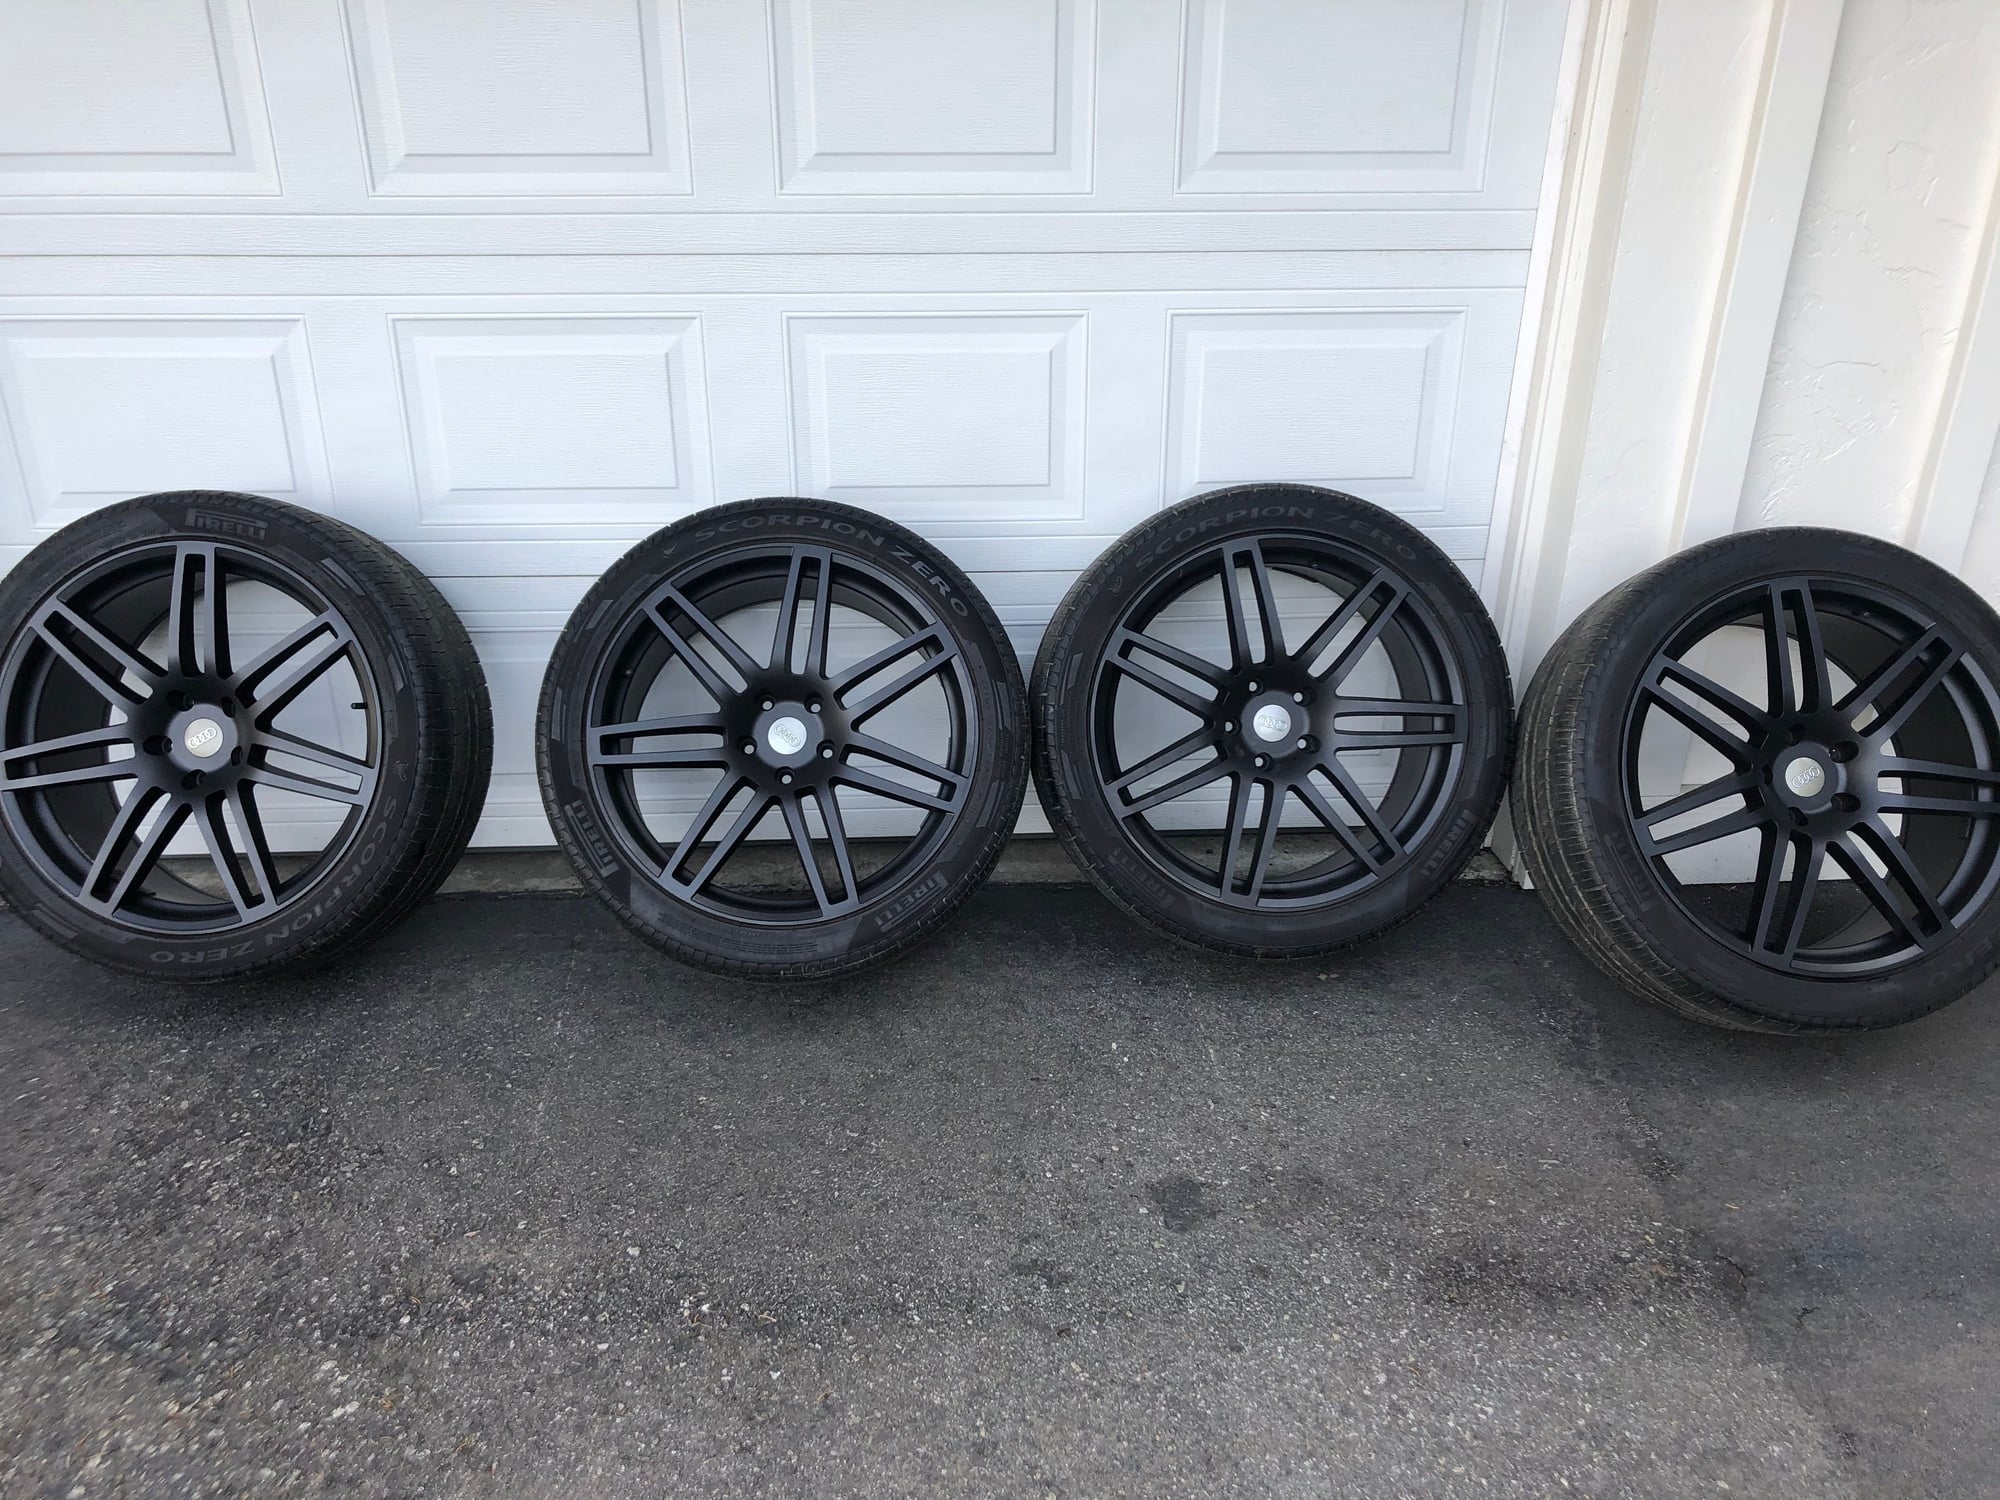 Wheels and Tires/Axles - Q7 22” RS4 style wheels - Used - 2006 to 2015 Audi Q7 - Leavenworth, WA 98826, United States